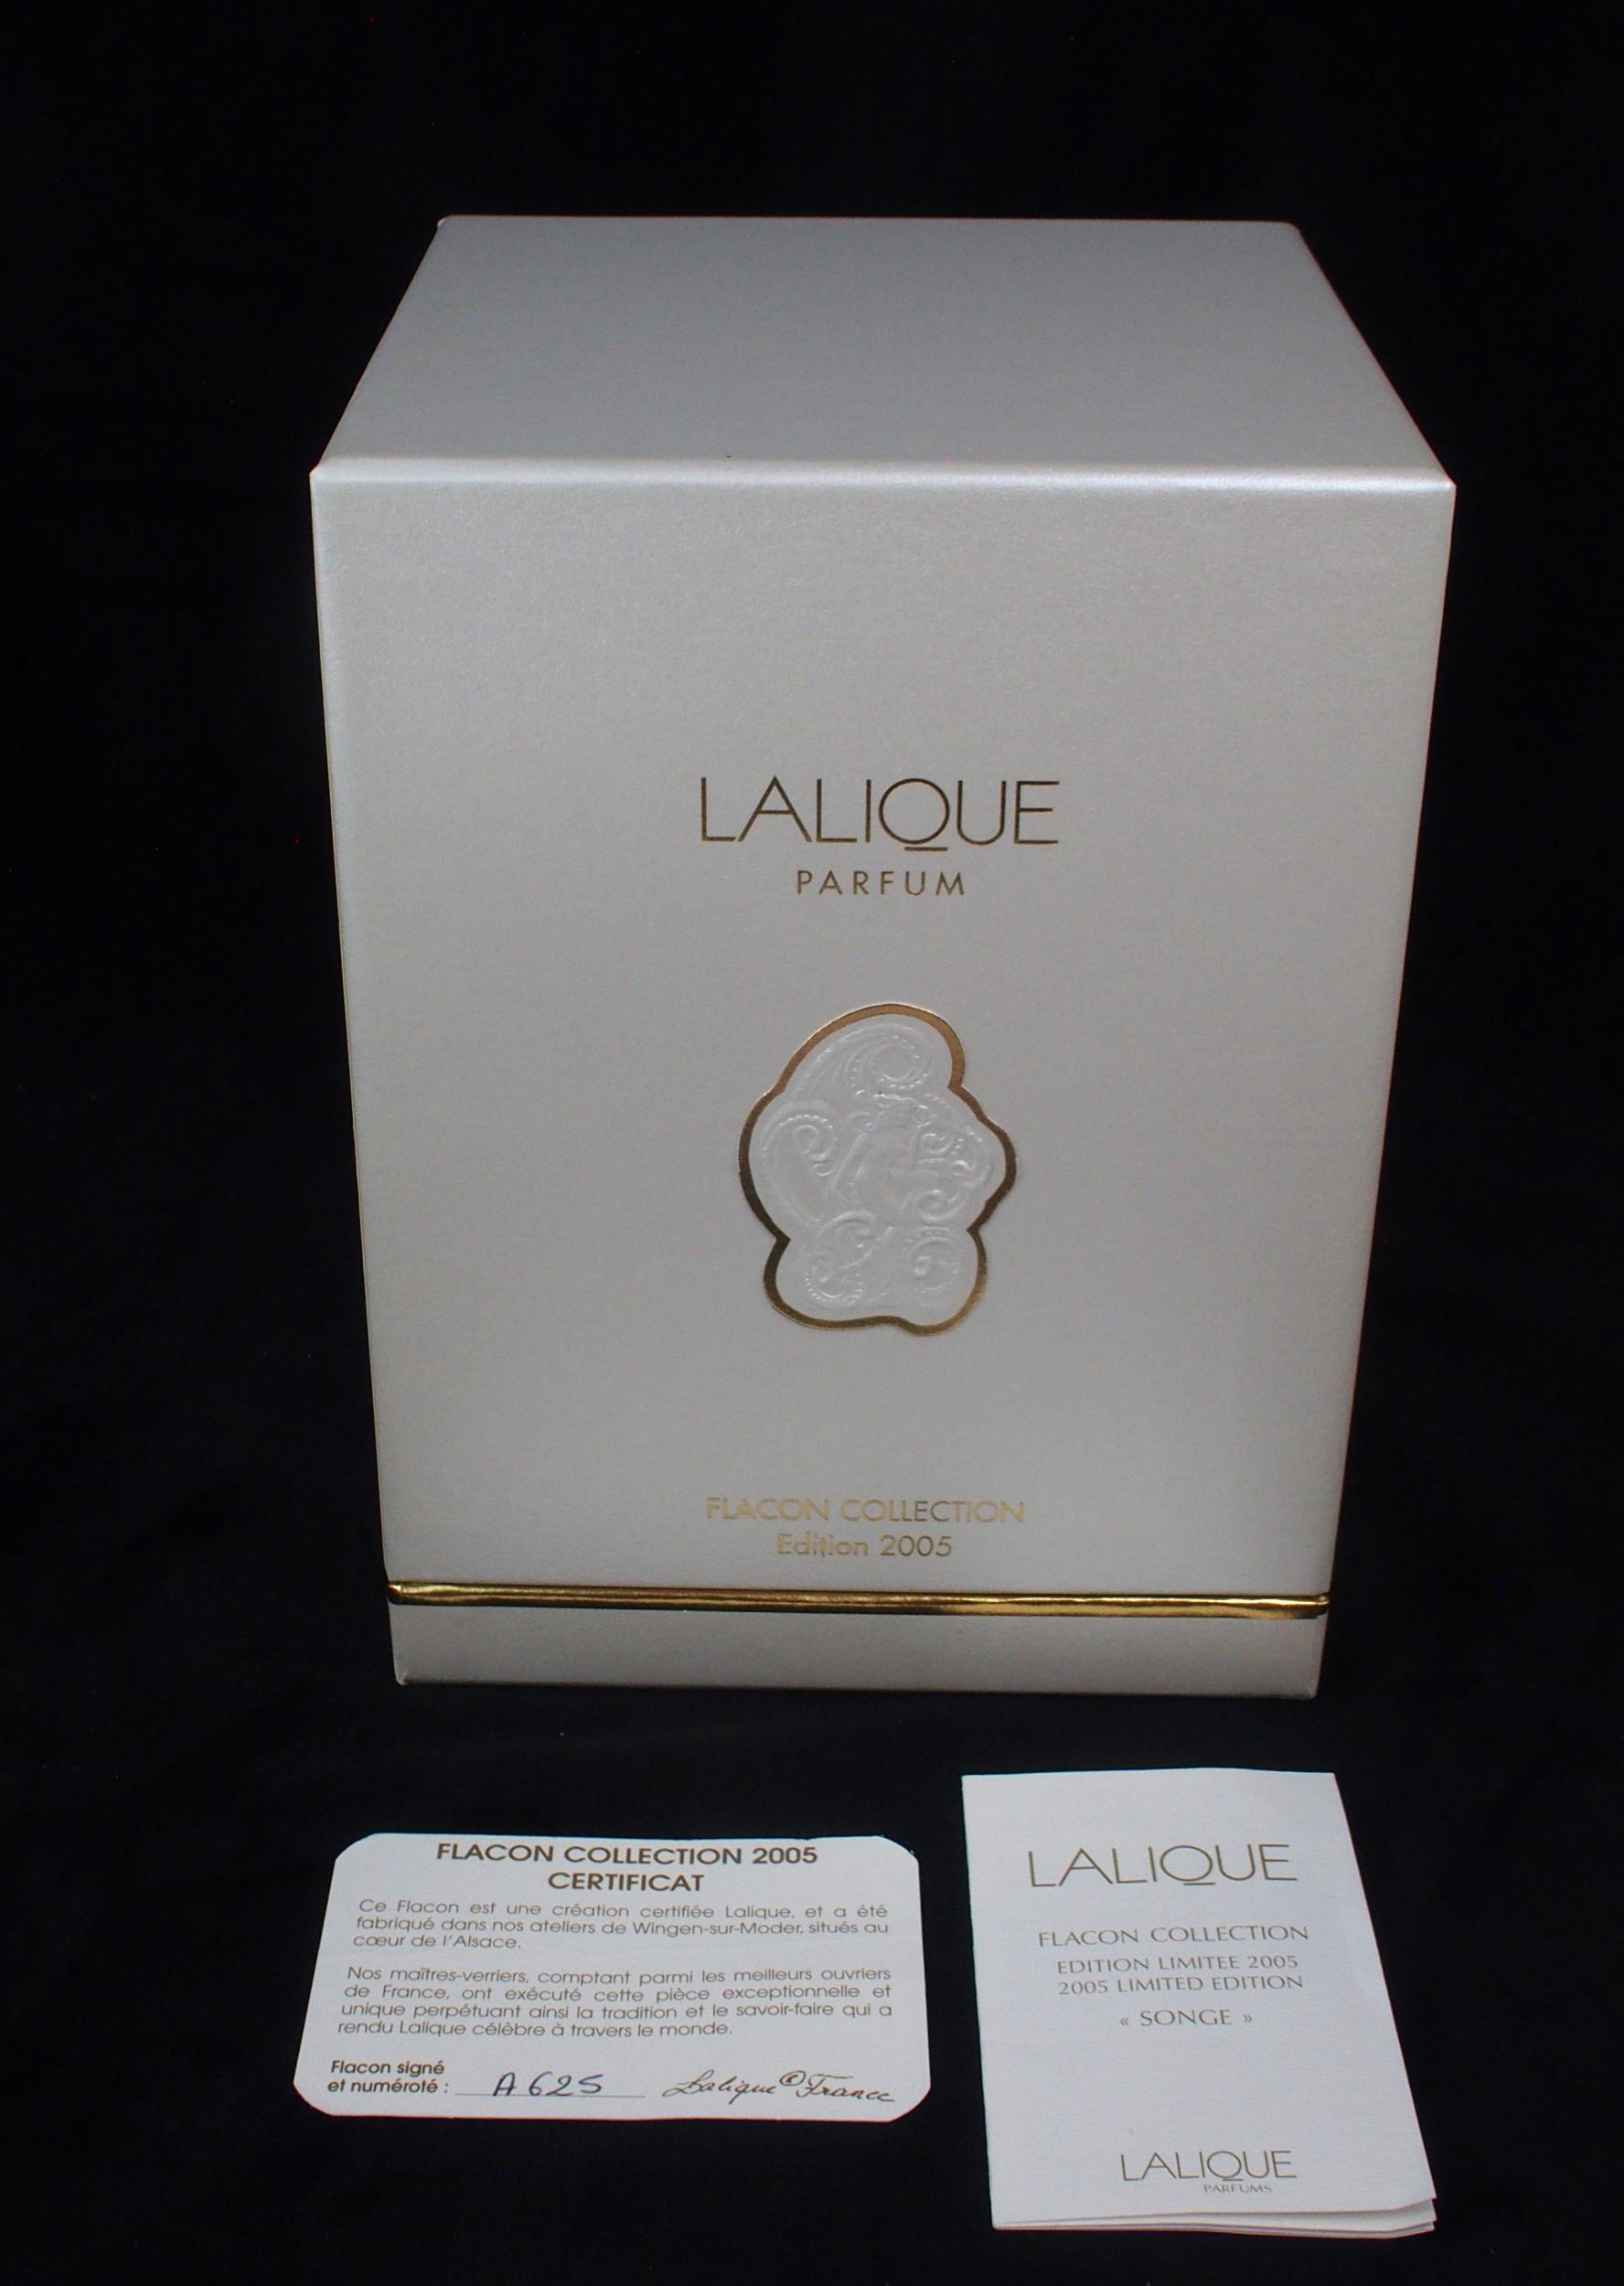 LALIQUE PARFUM, FLACON COLLECTION Limited Edition 'Songe' (2005) Perfume, 100ml bottle in clear - Image 6 of 6